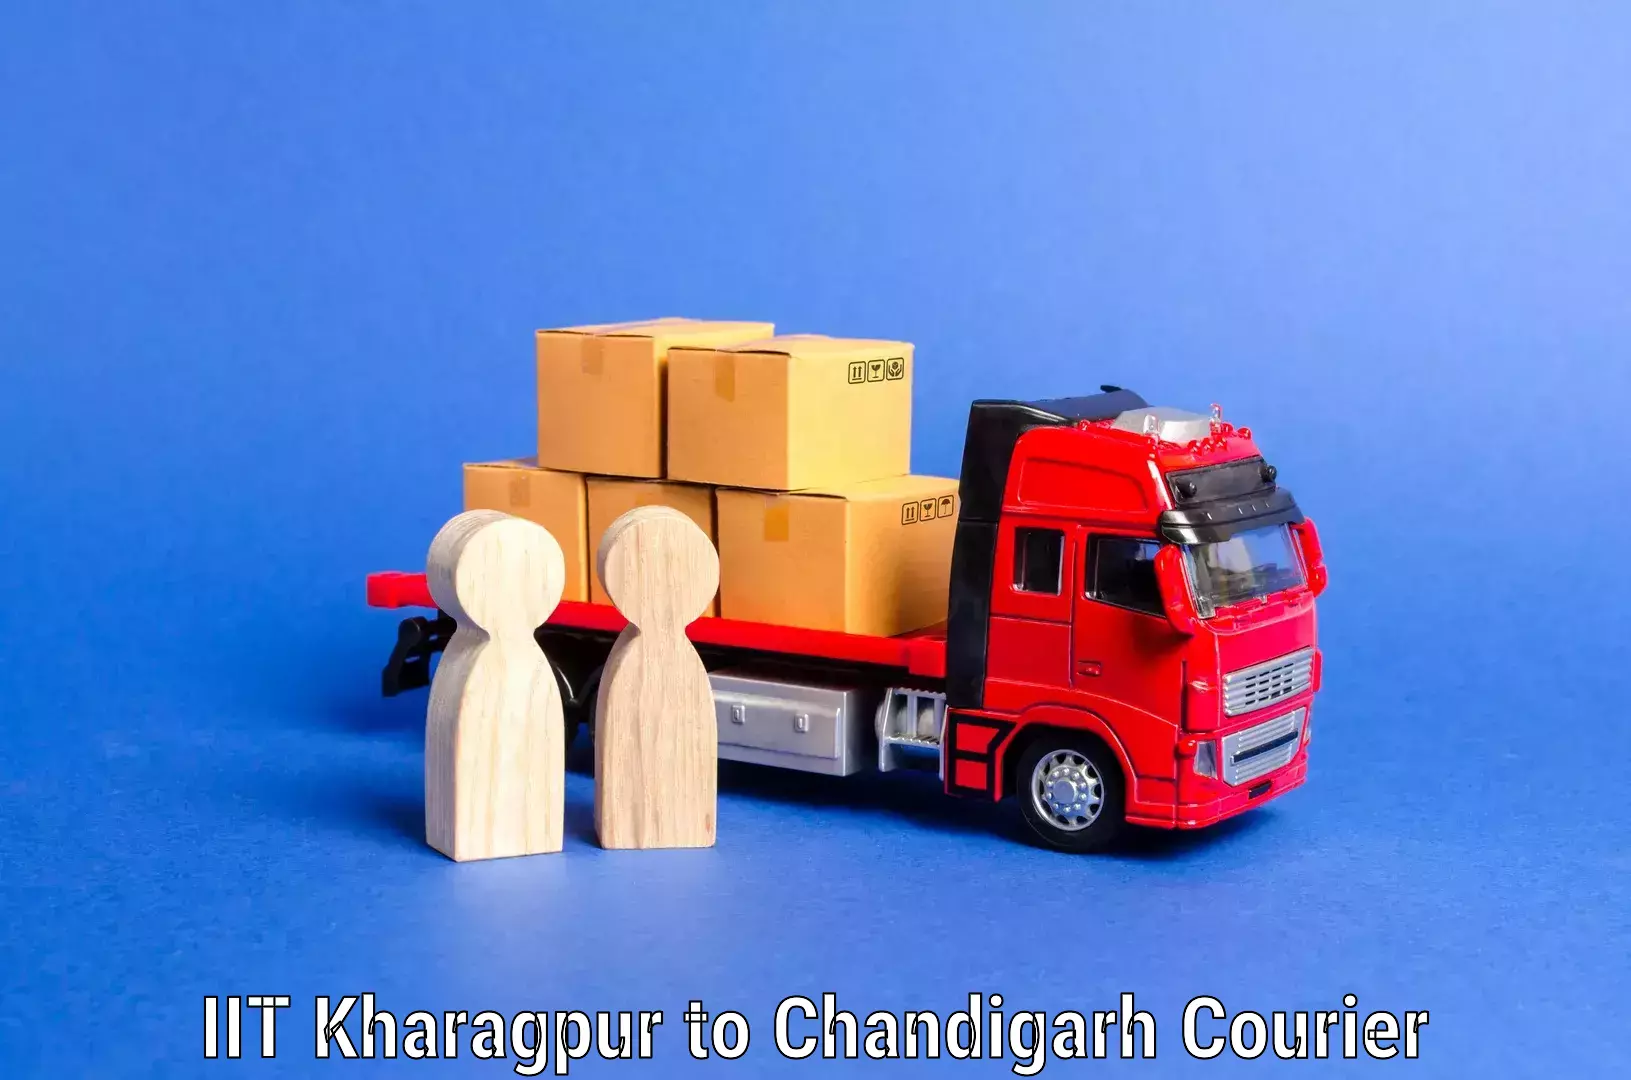 Home relocation experts IIT Kharagpur to Chandigarh